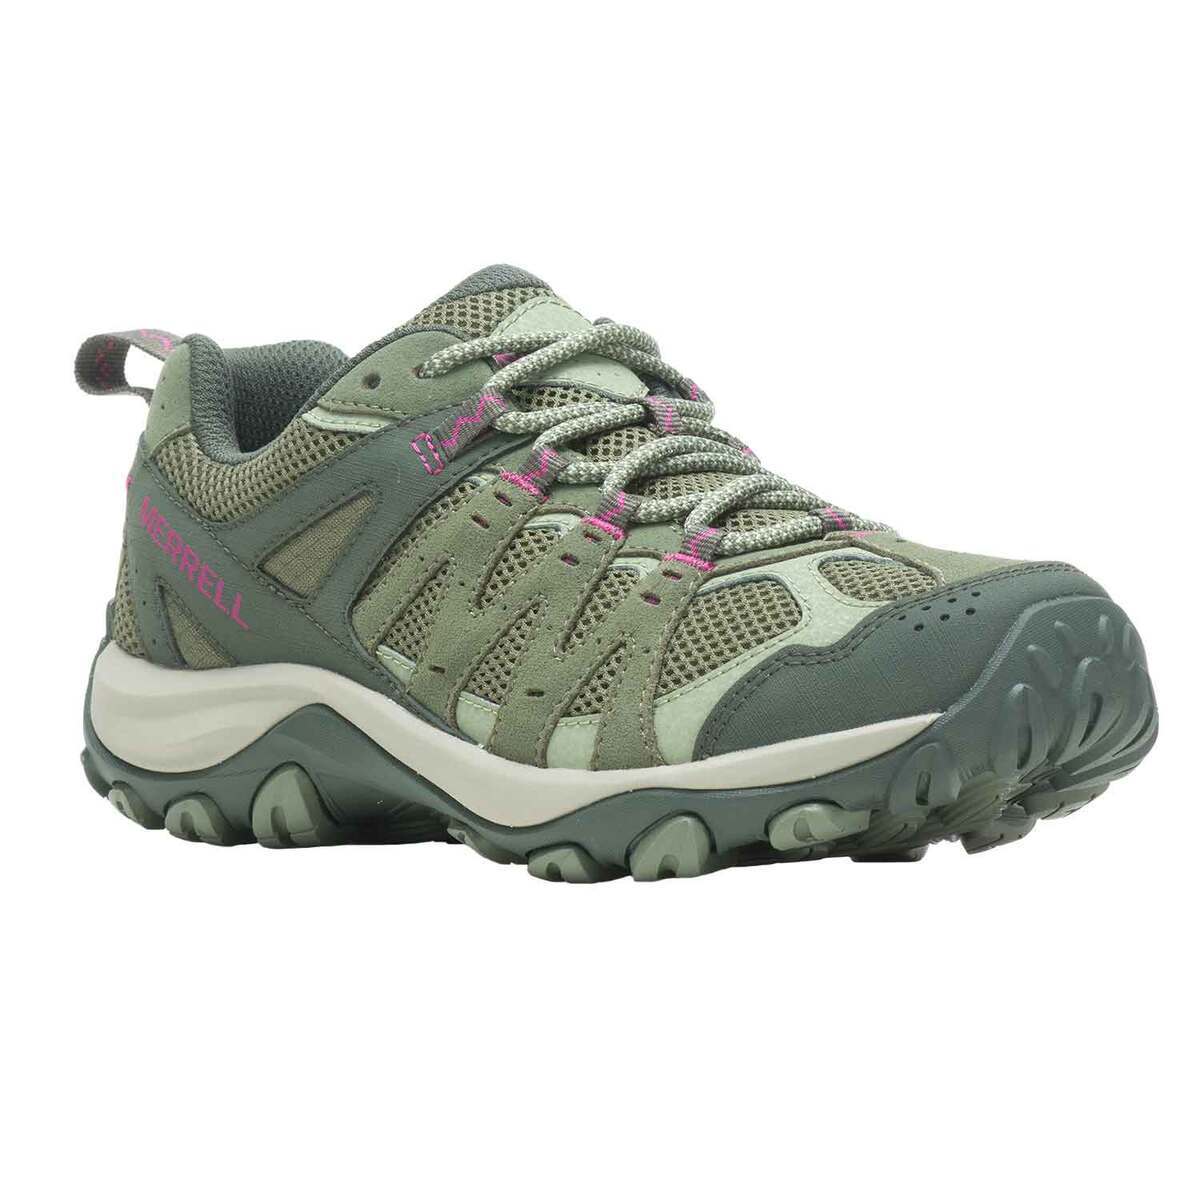 Merrell Accentor 3 Low Hiking Shoes Warehouse